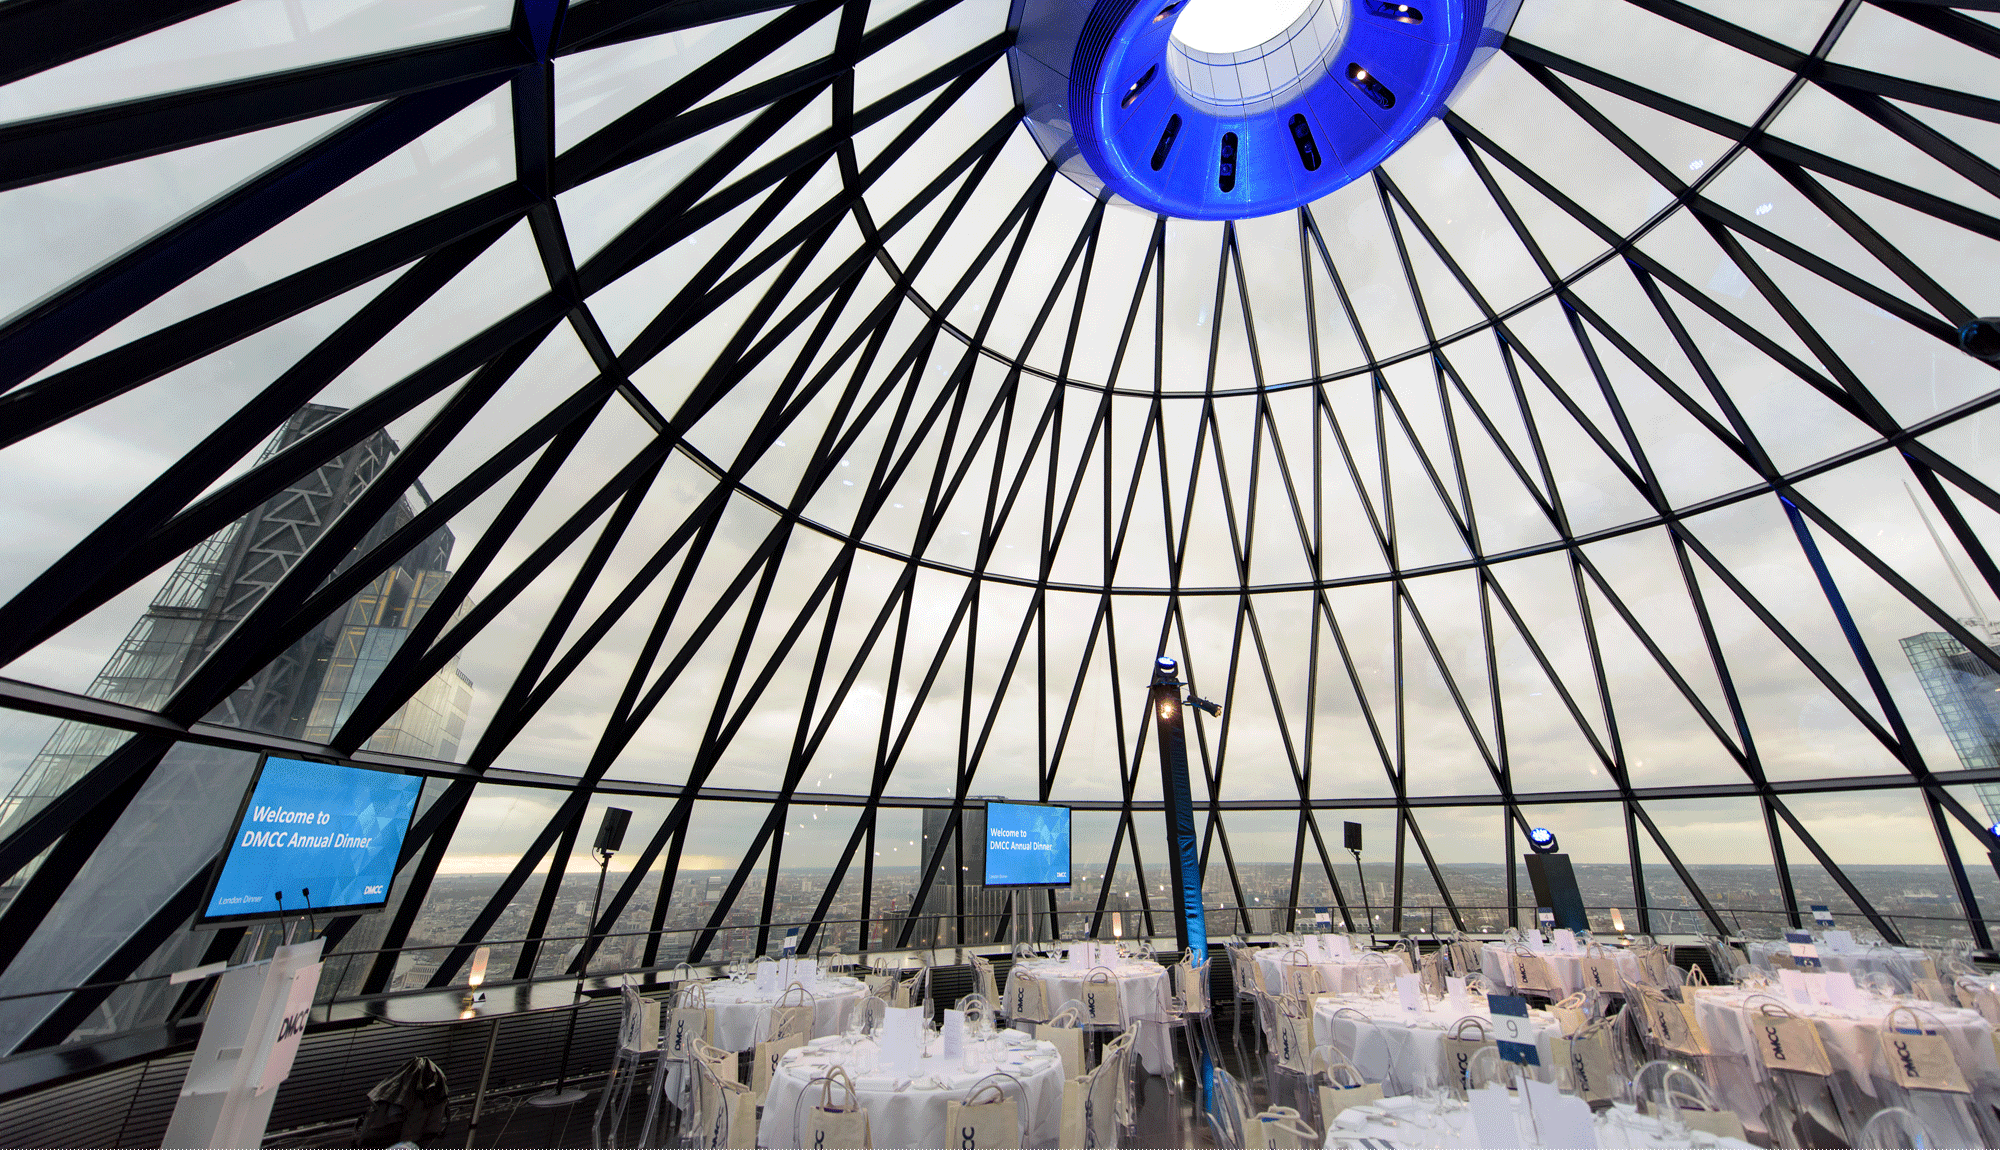 Annual Dinner at the Gherkin